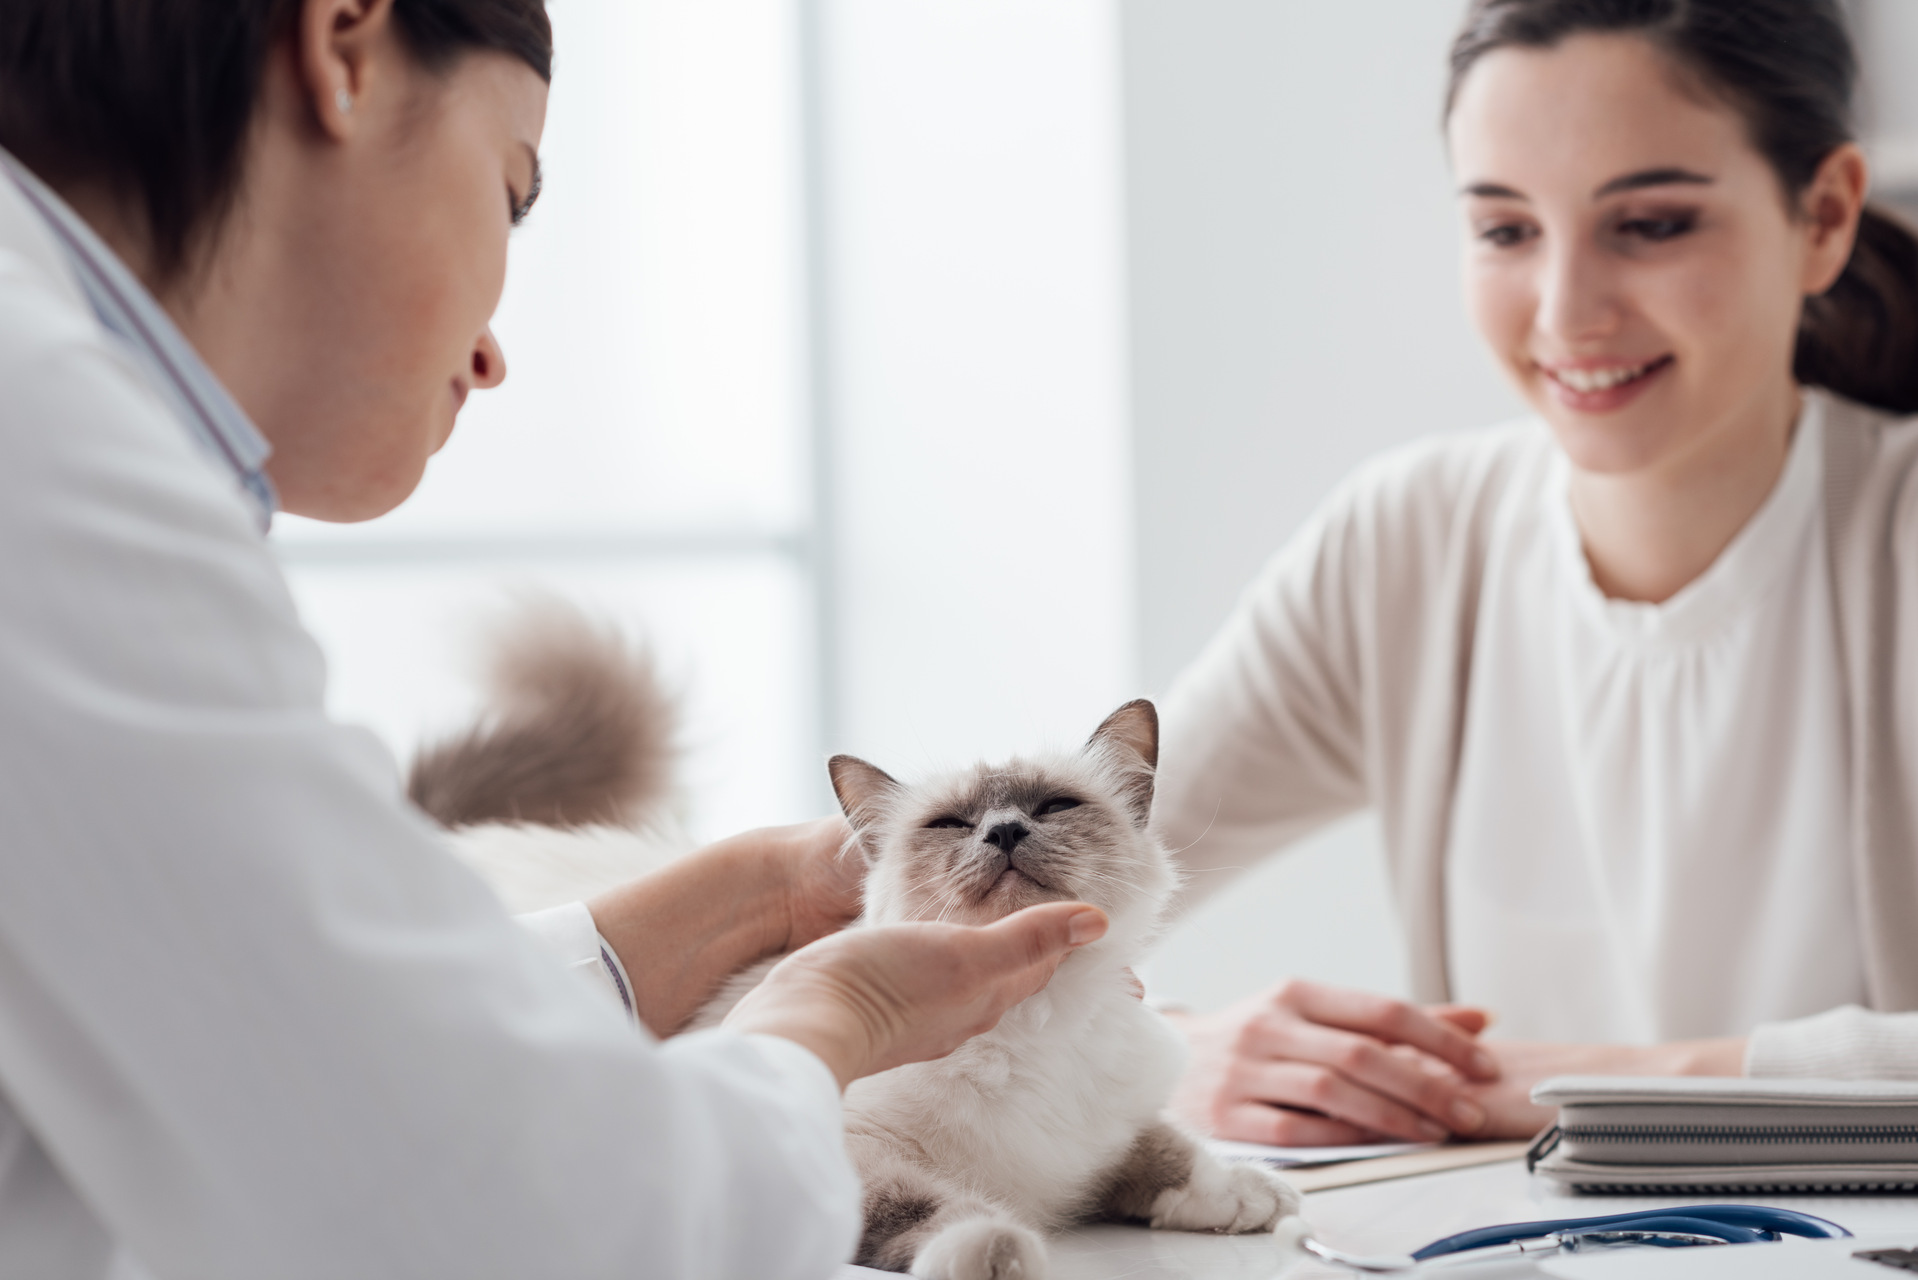 A vet examining a cat at her clinic